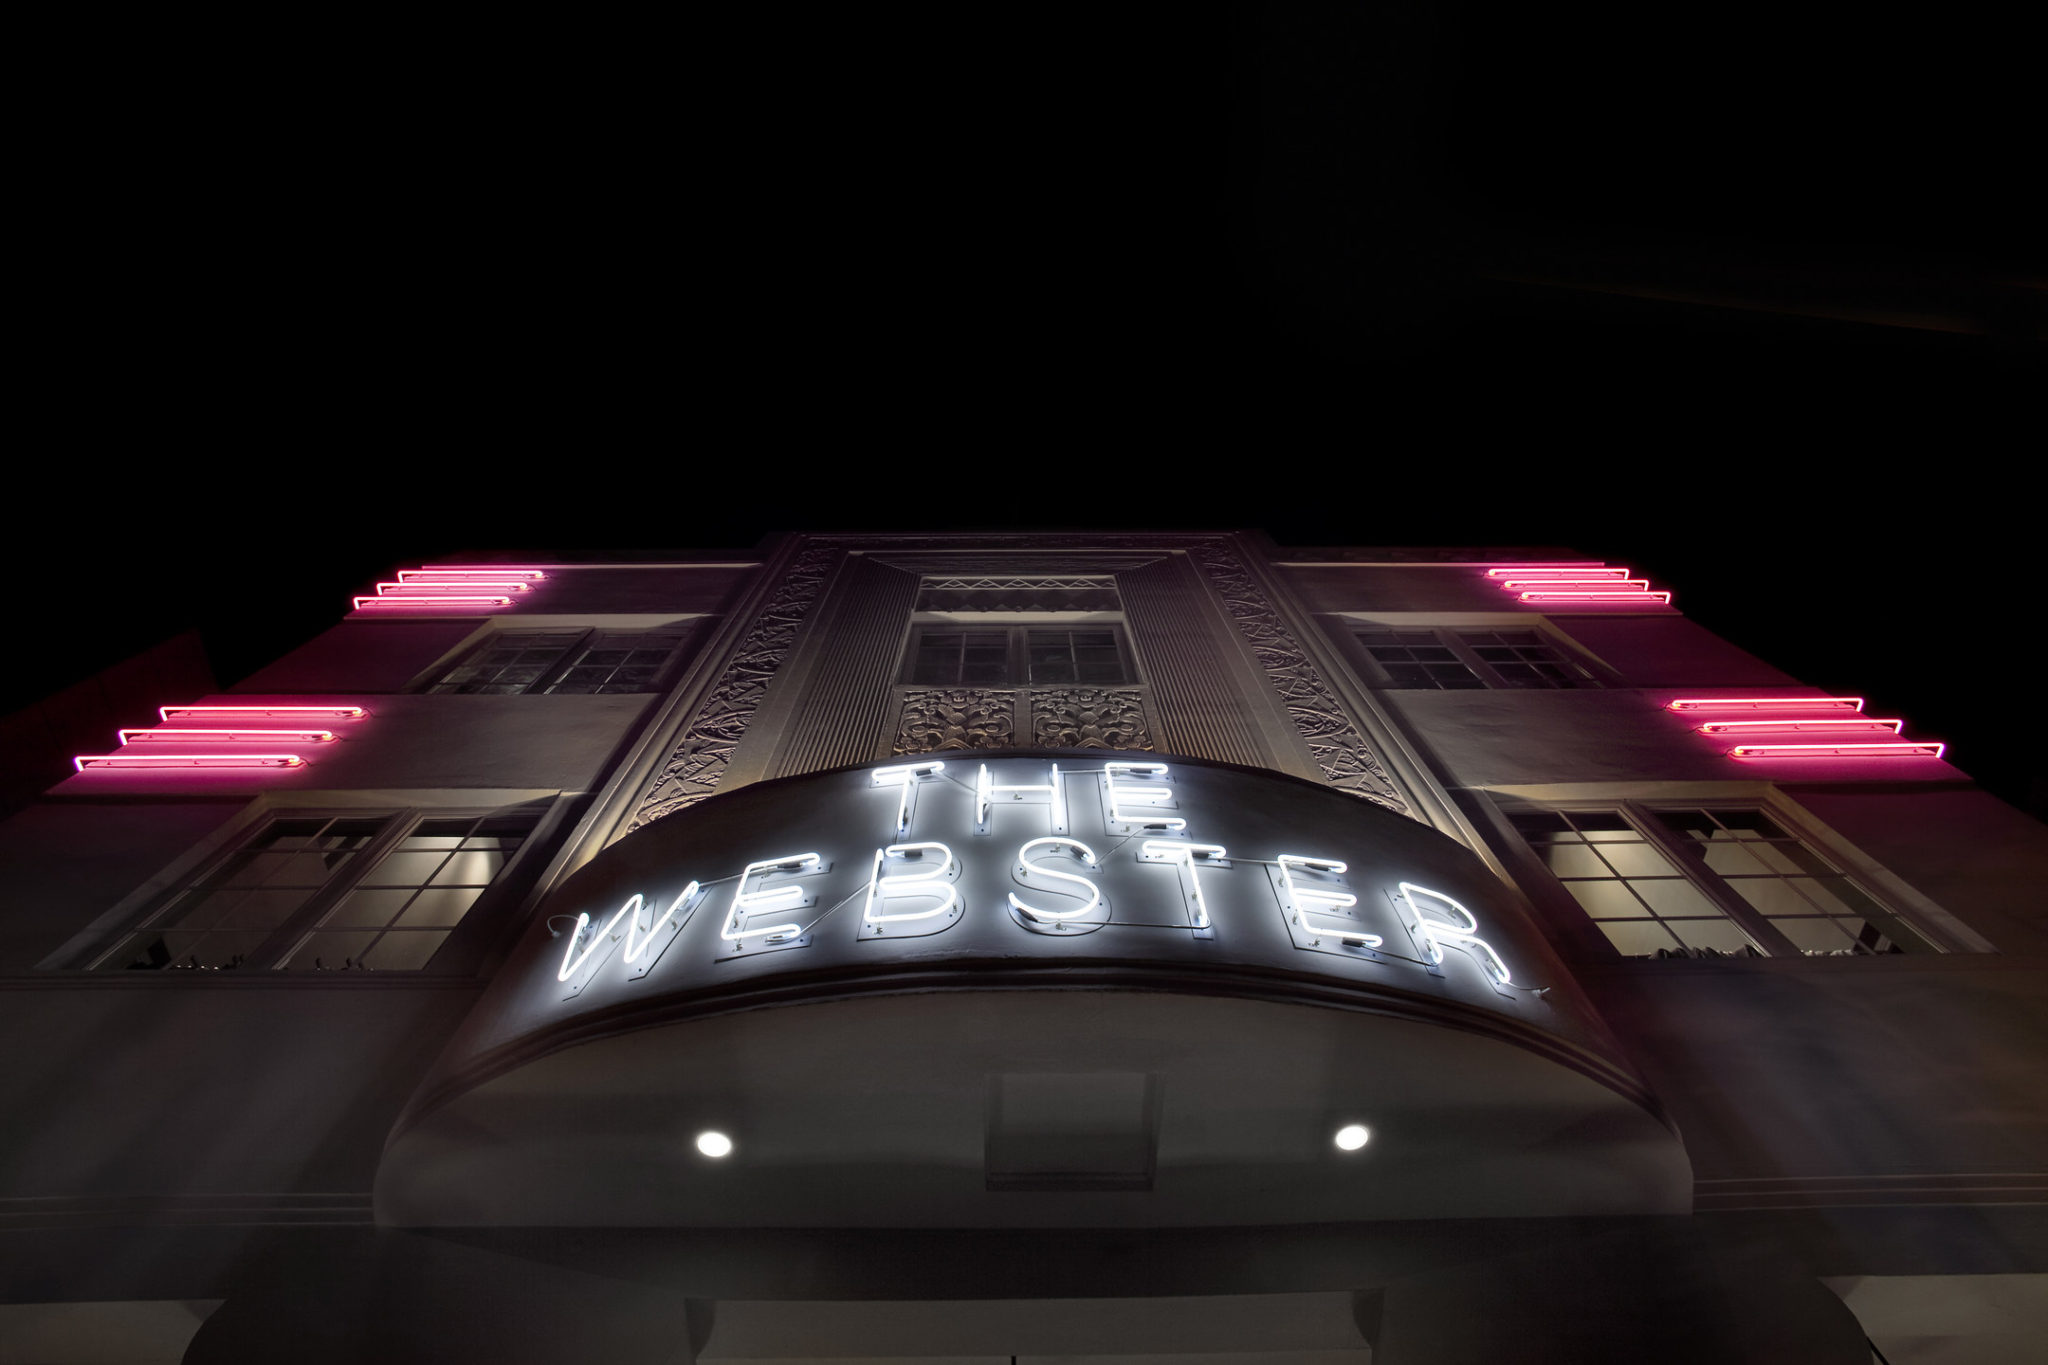  | The Webster Miami | 1